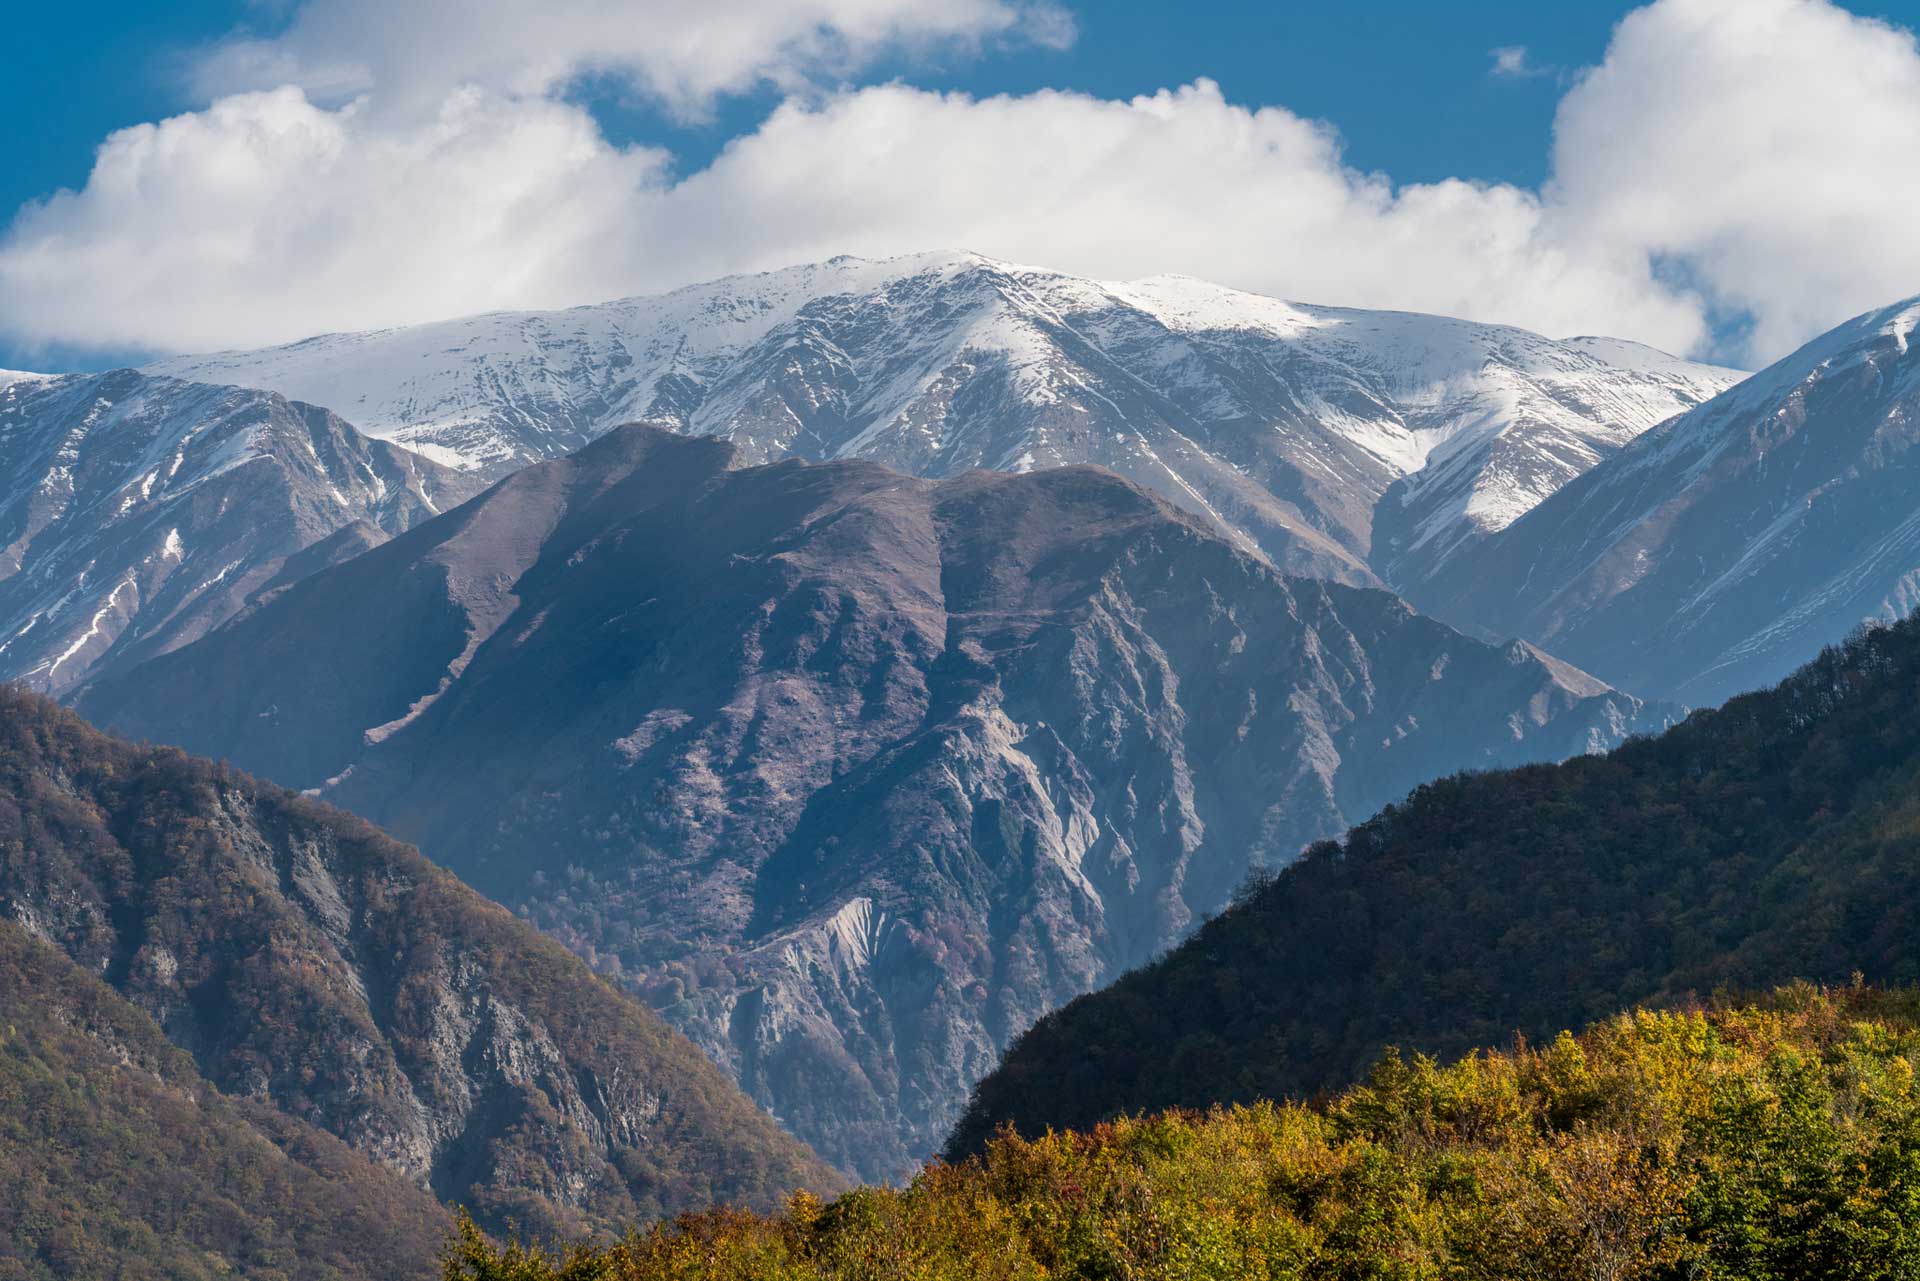 Looking north into Russia and the Caucasus Mountains from northern Azerbaijan. Photo credit: Jered Goman